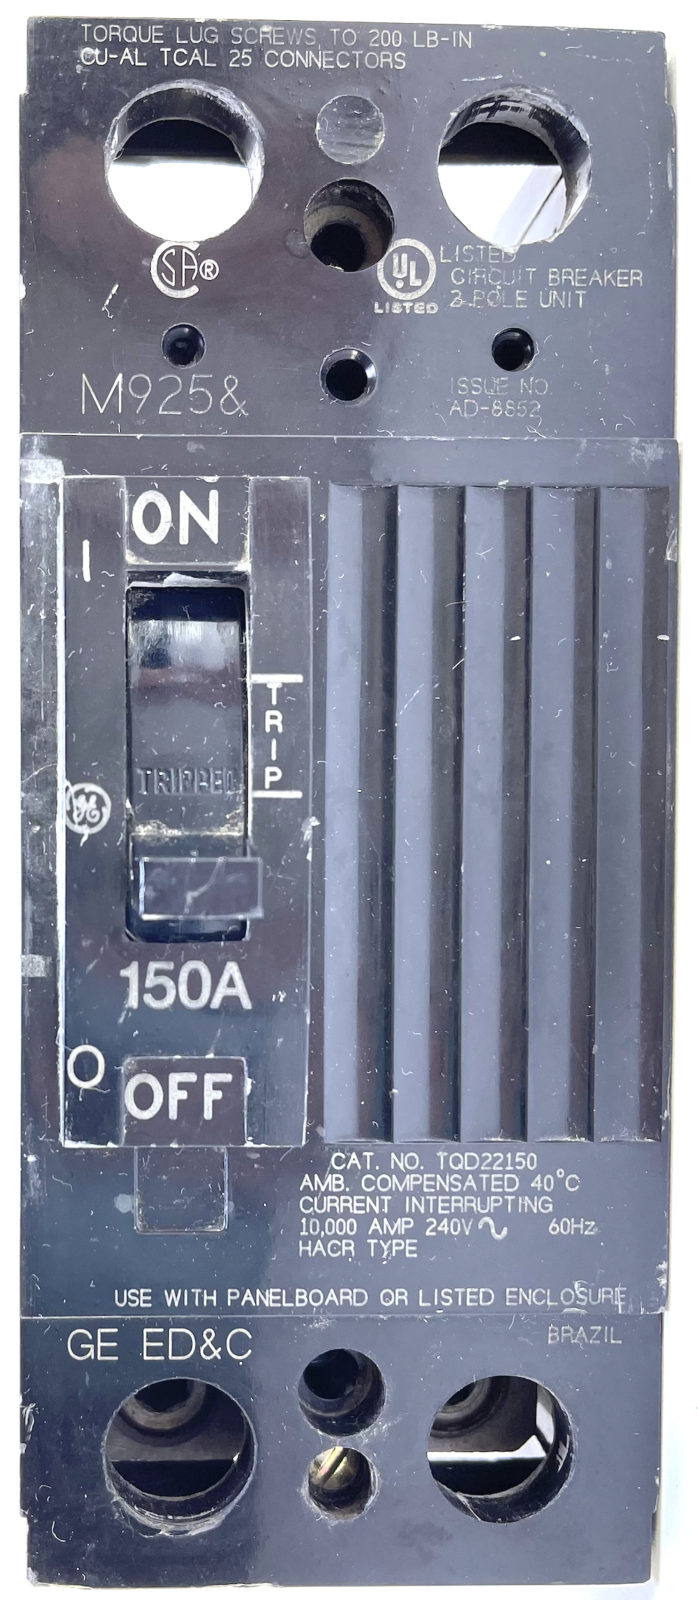 GE General Electric TQD22150 150 Amp 2 Pole Phase 240 VAC Circuit Breaker 150a for sale online 